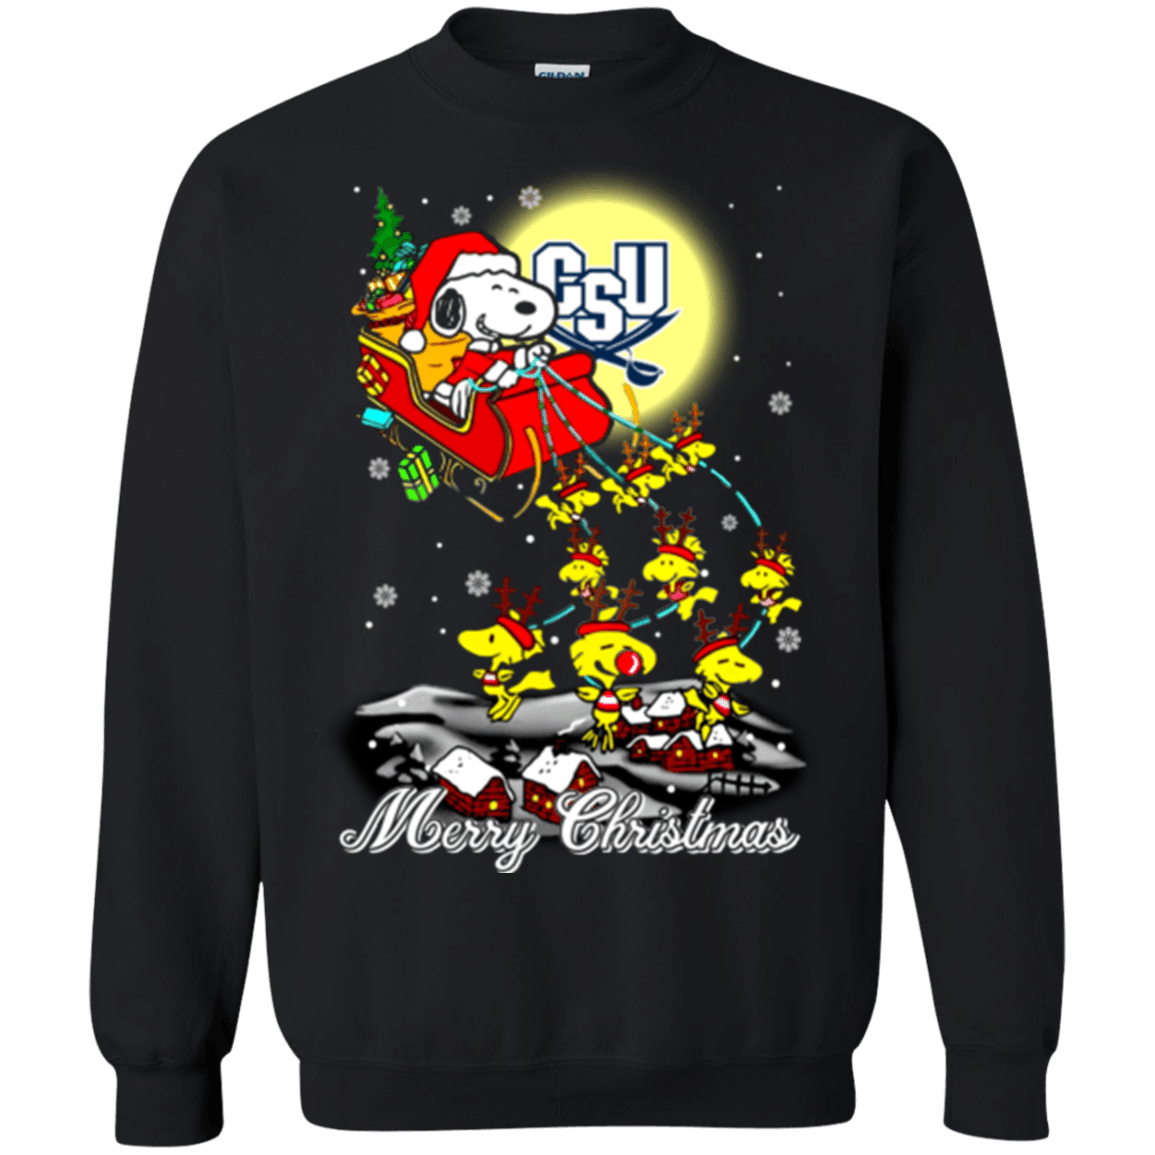 Amazing Charleston Southern Buccaneers Snoopy Ugly Christmas Sweaters Santa Claus With Sleigh Sweatshirts